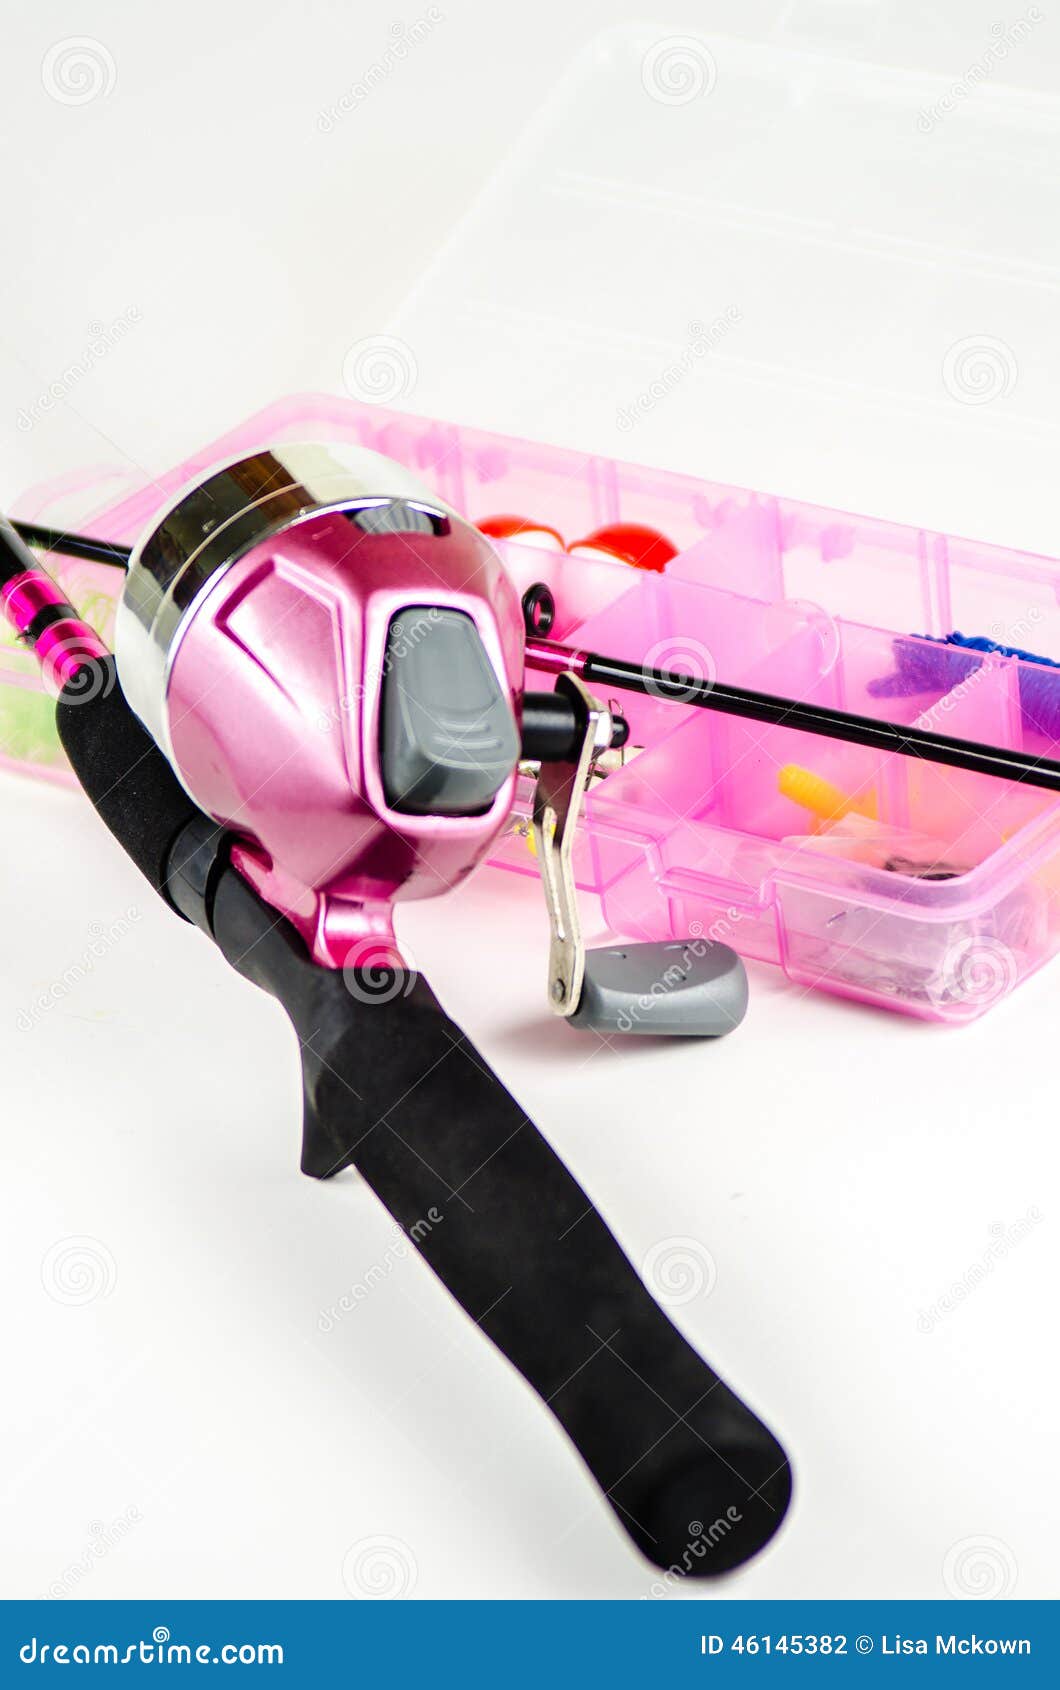 https://thumbs.dreamstime.com/z/fishing-pole-tackle-pink-gear-box-awareness-breast-cancer-46145382.jpg